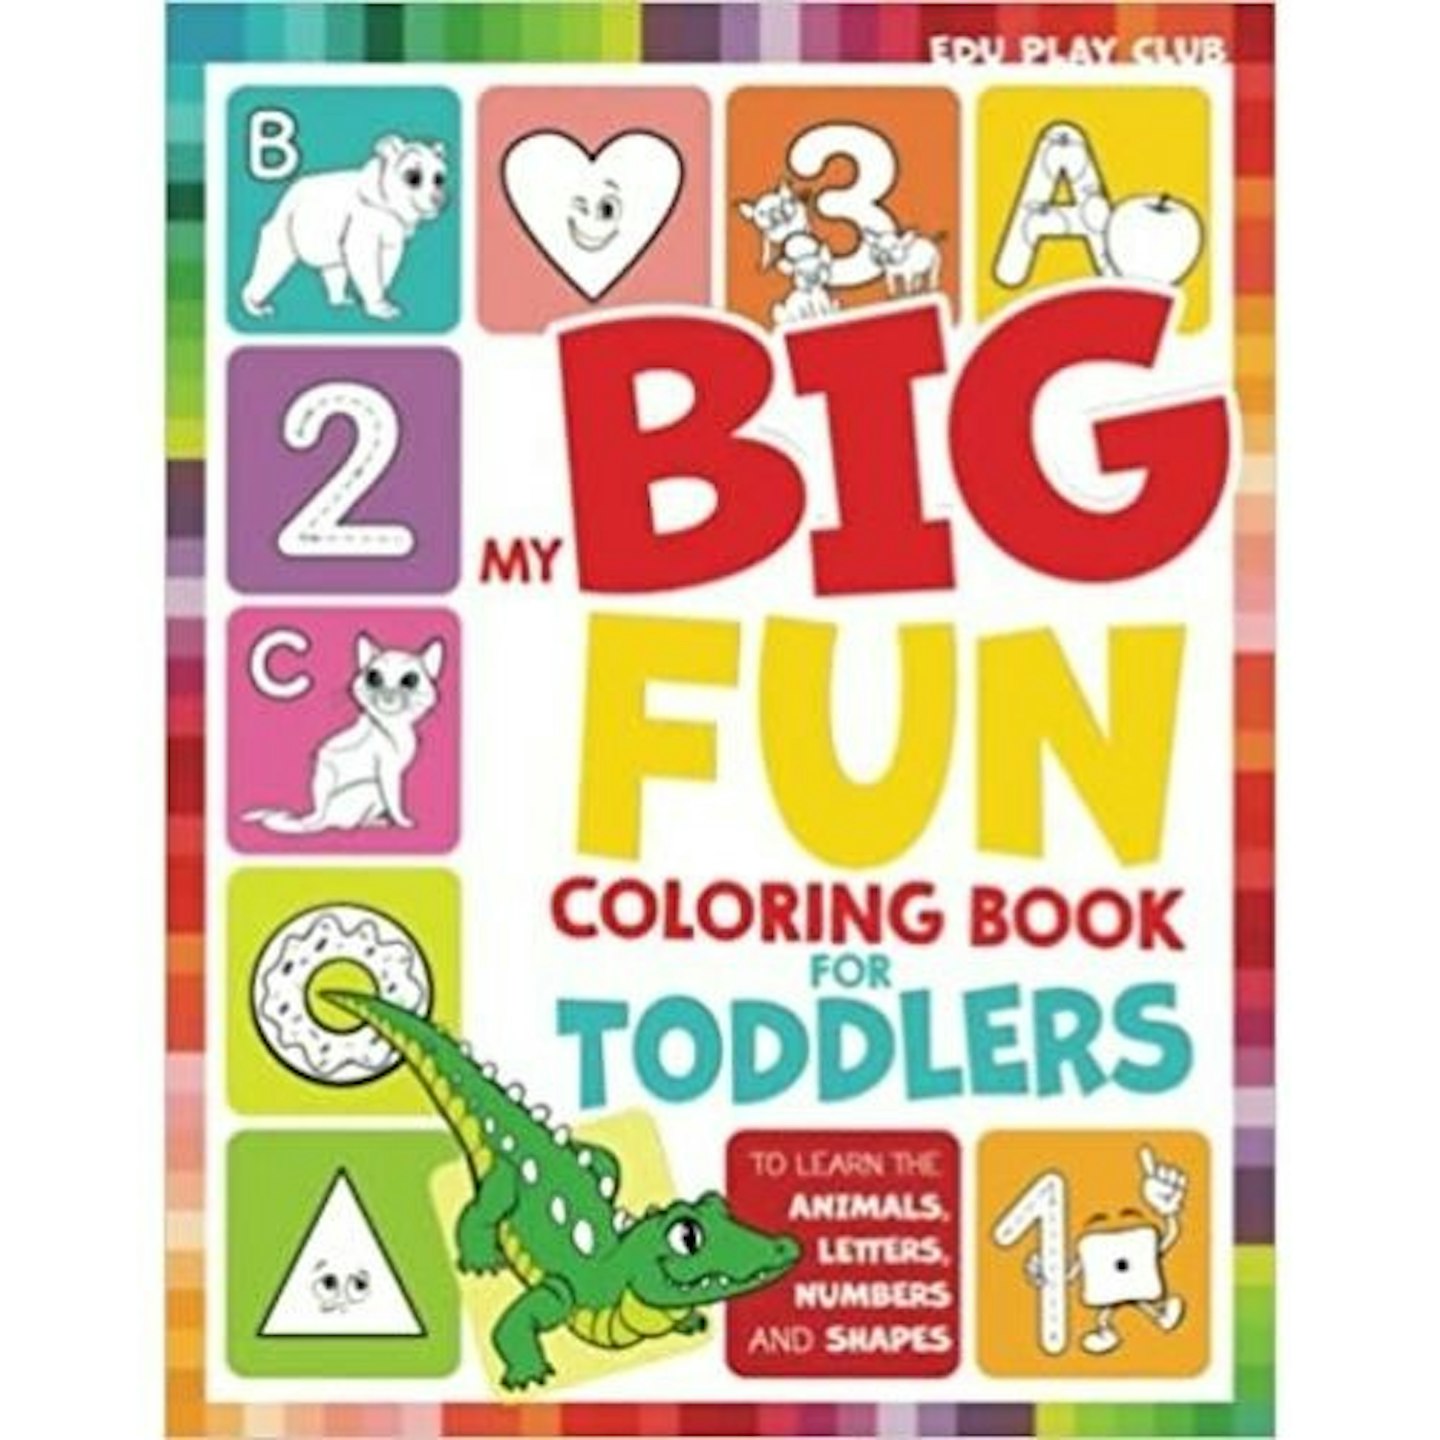 My Big Fun Colouring Book For Toddlers